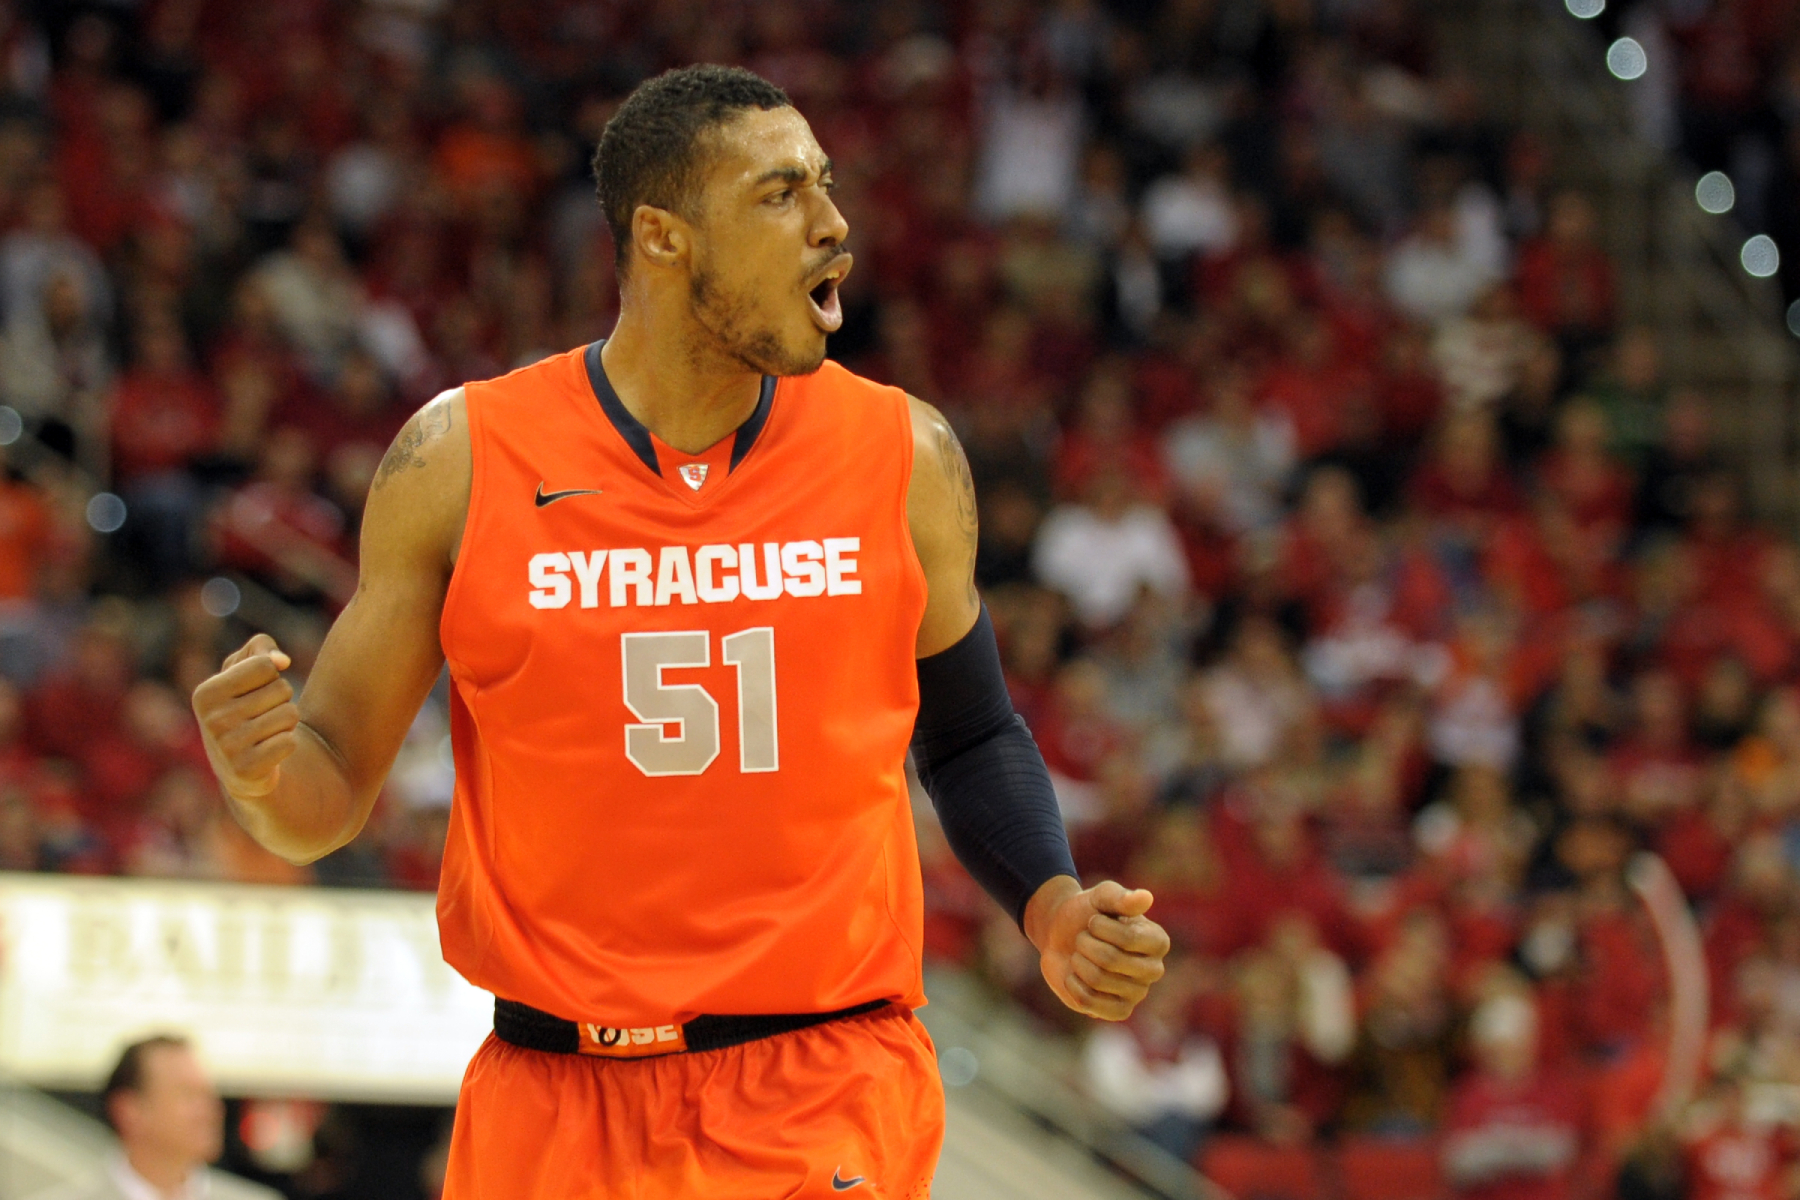 Fab Melo was a star at Syracuse and helped them become a top college basketball team in the country. He, however, died way too soon.